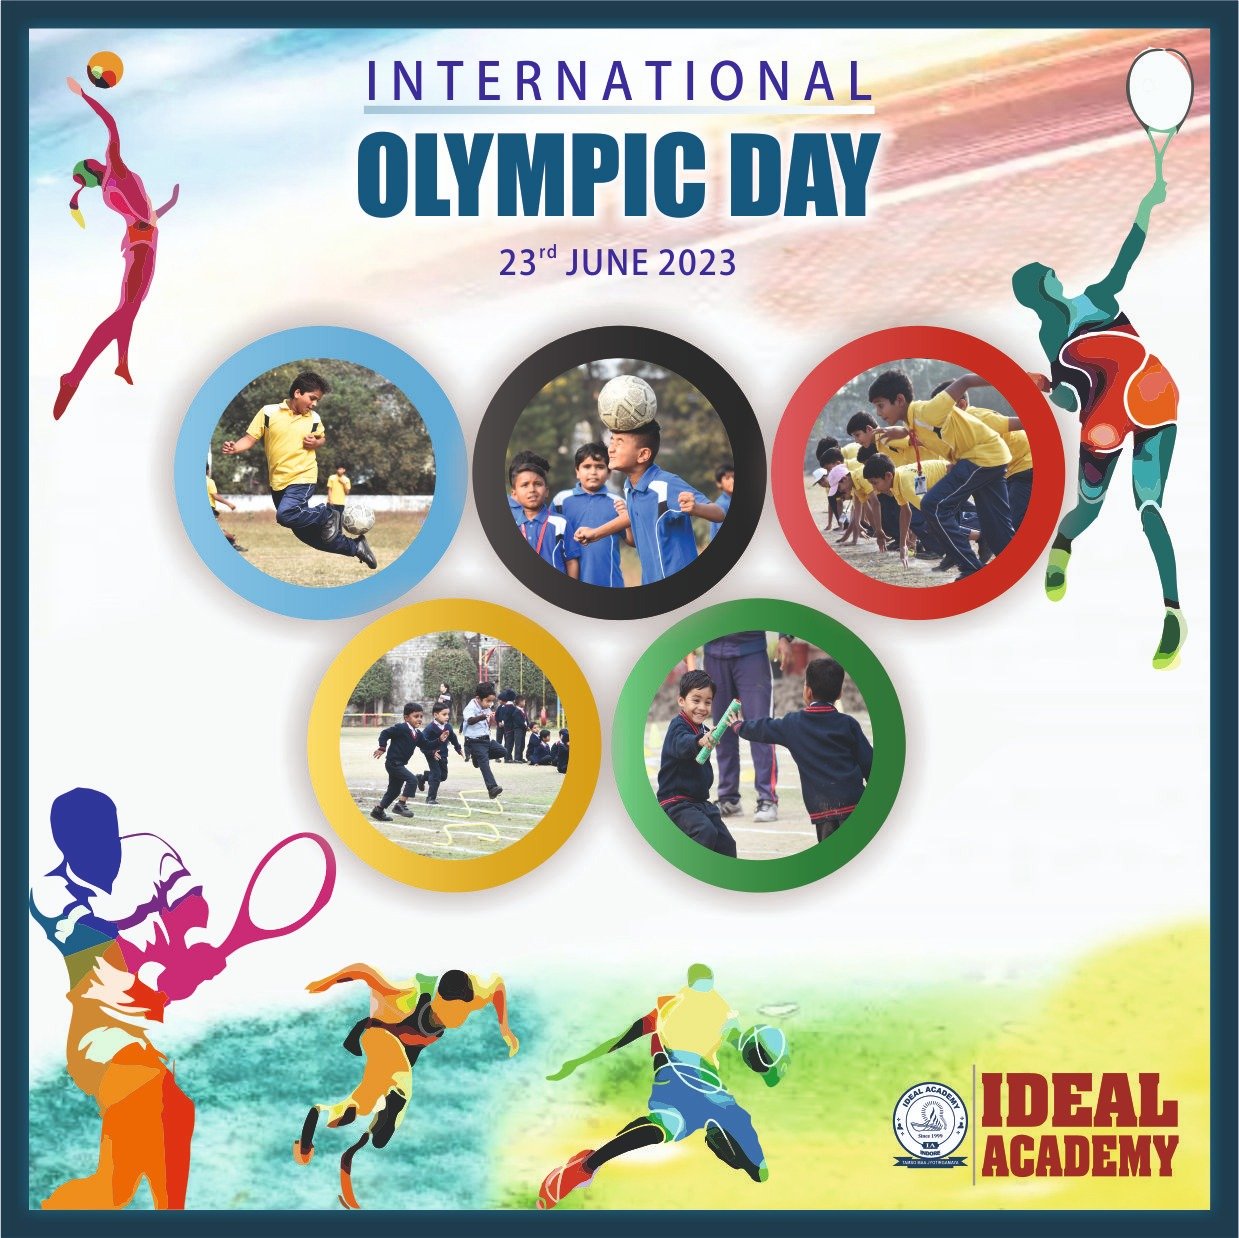 International Olympic Day 23rd June 2023 Ideal Academy